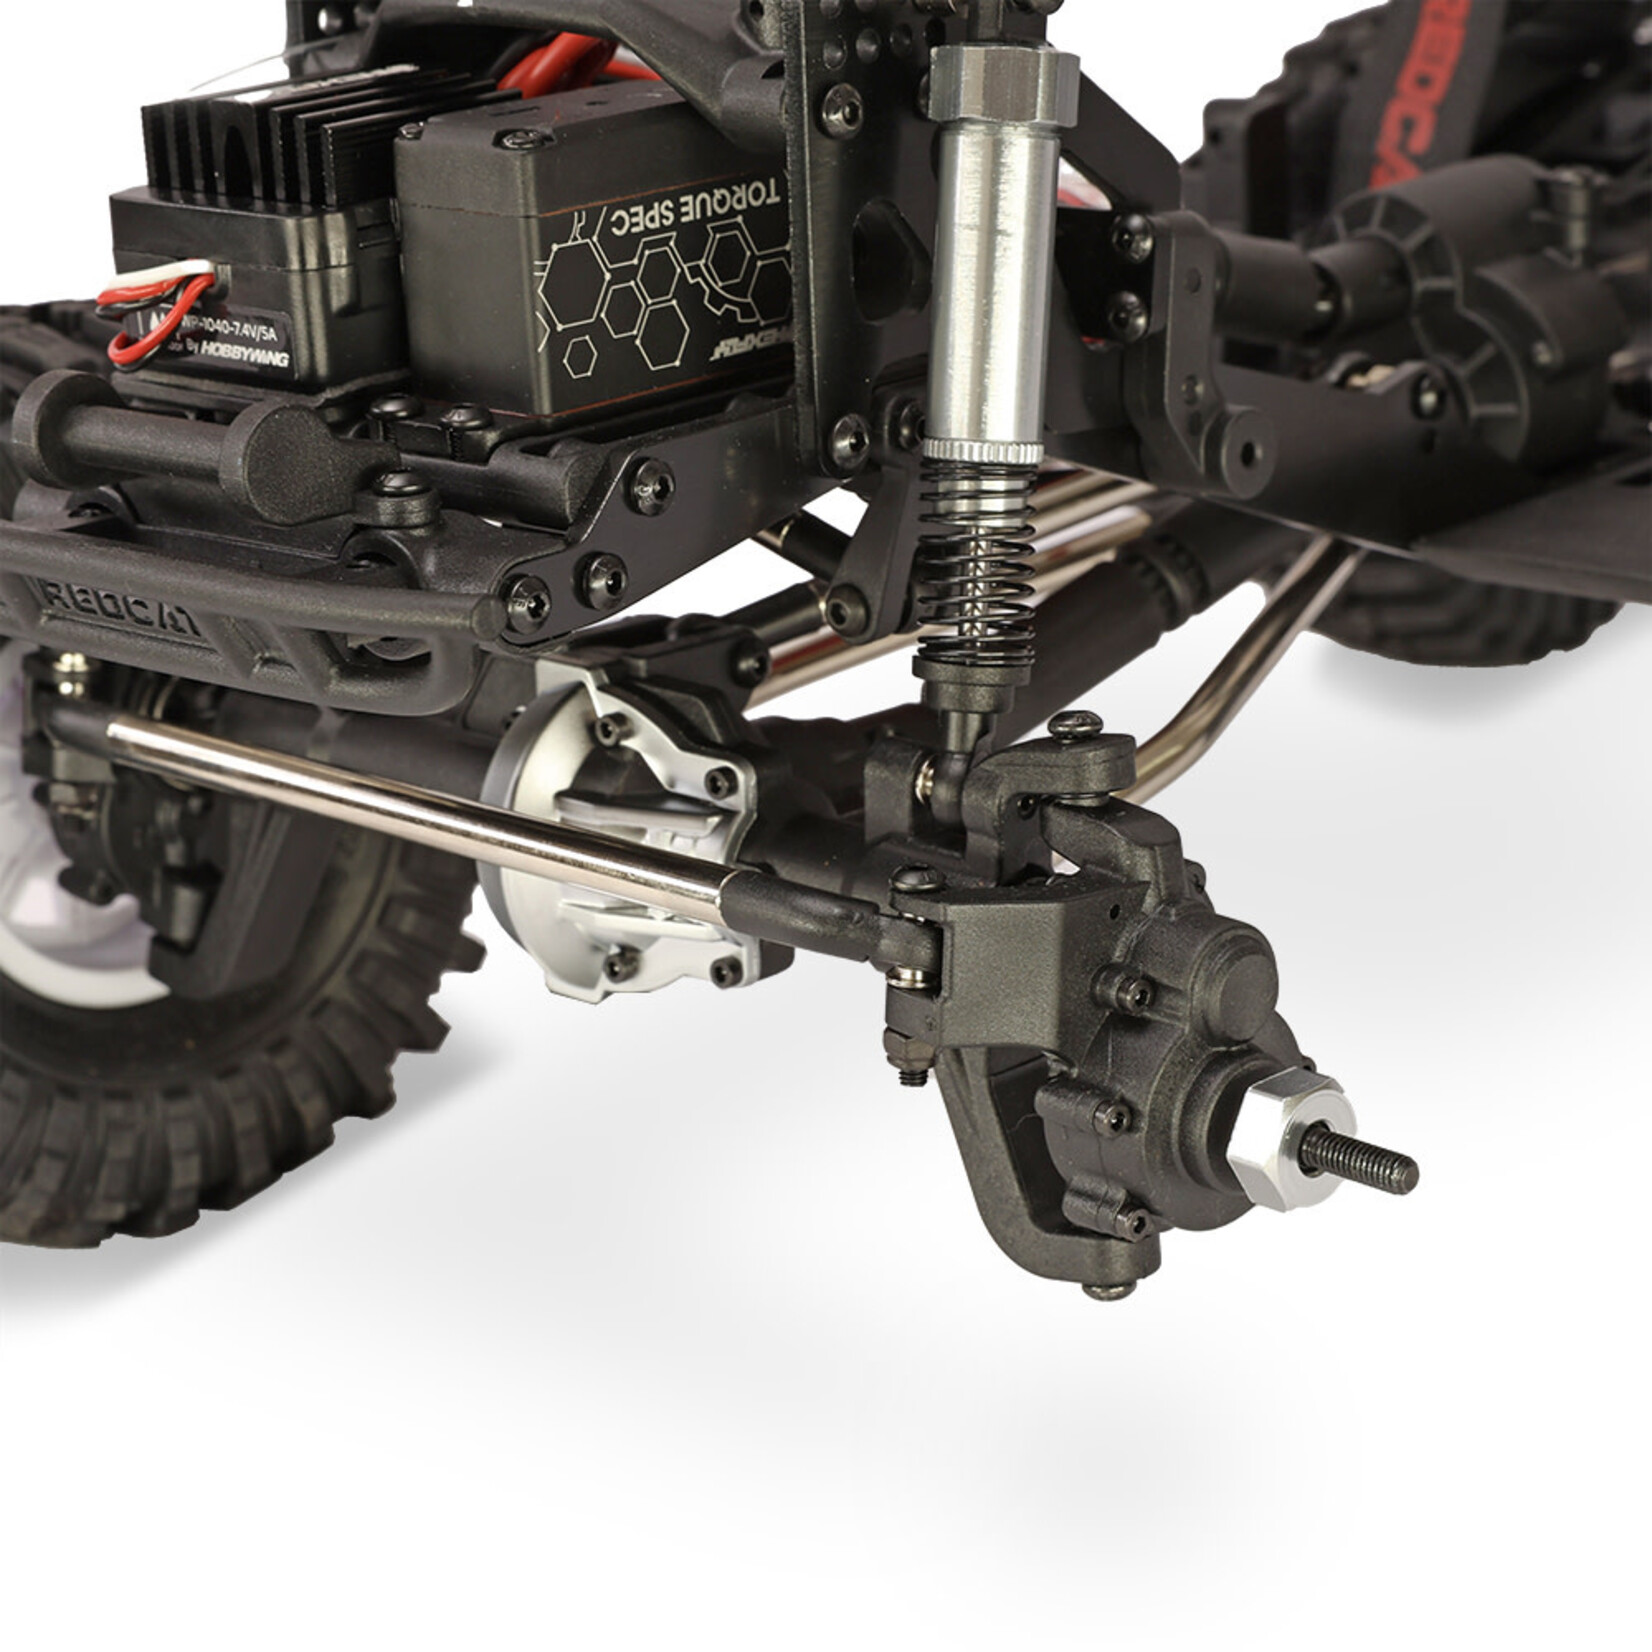 Redcat Racing Everest Ascent 1/10 Scale Crawler - RED